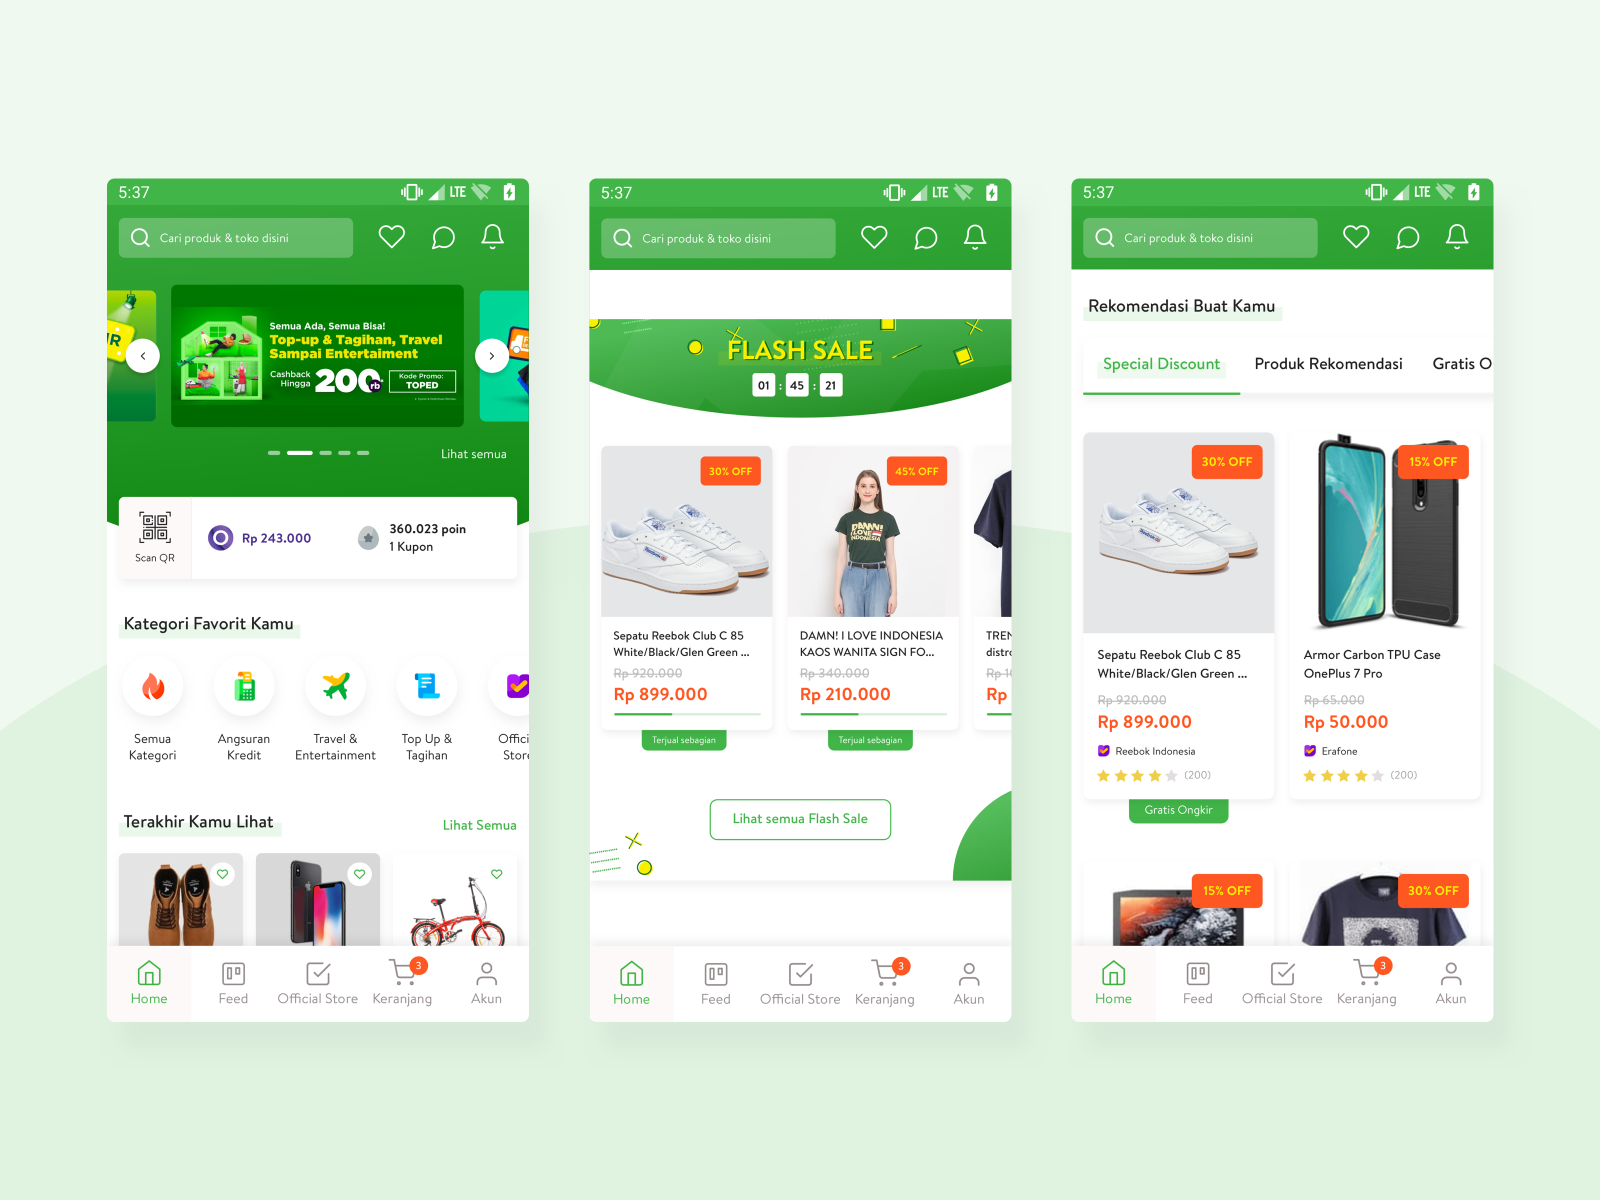 Verwonderend Ecommerce - Mobile App Design Inspiration by Asep Irman on Dribbble XS-35